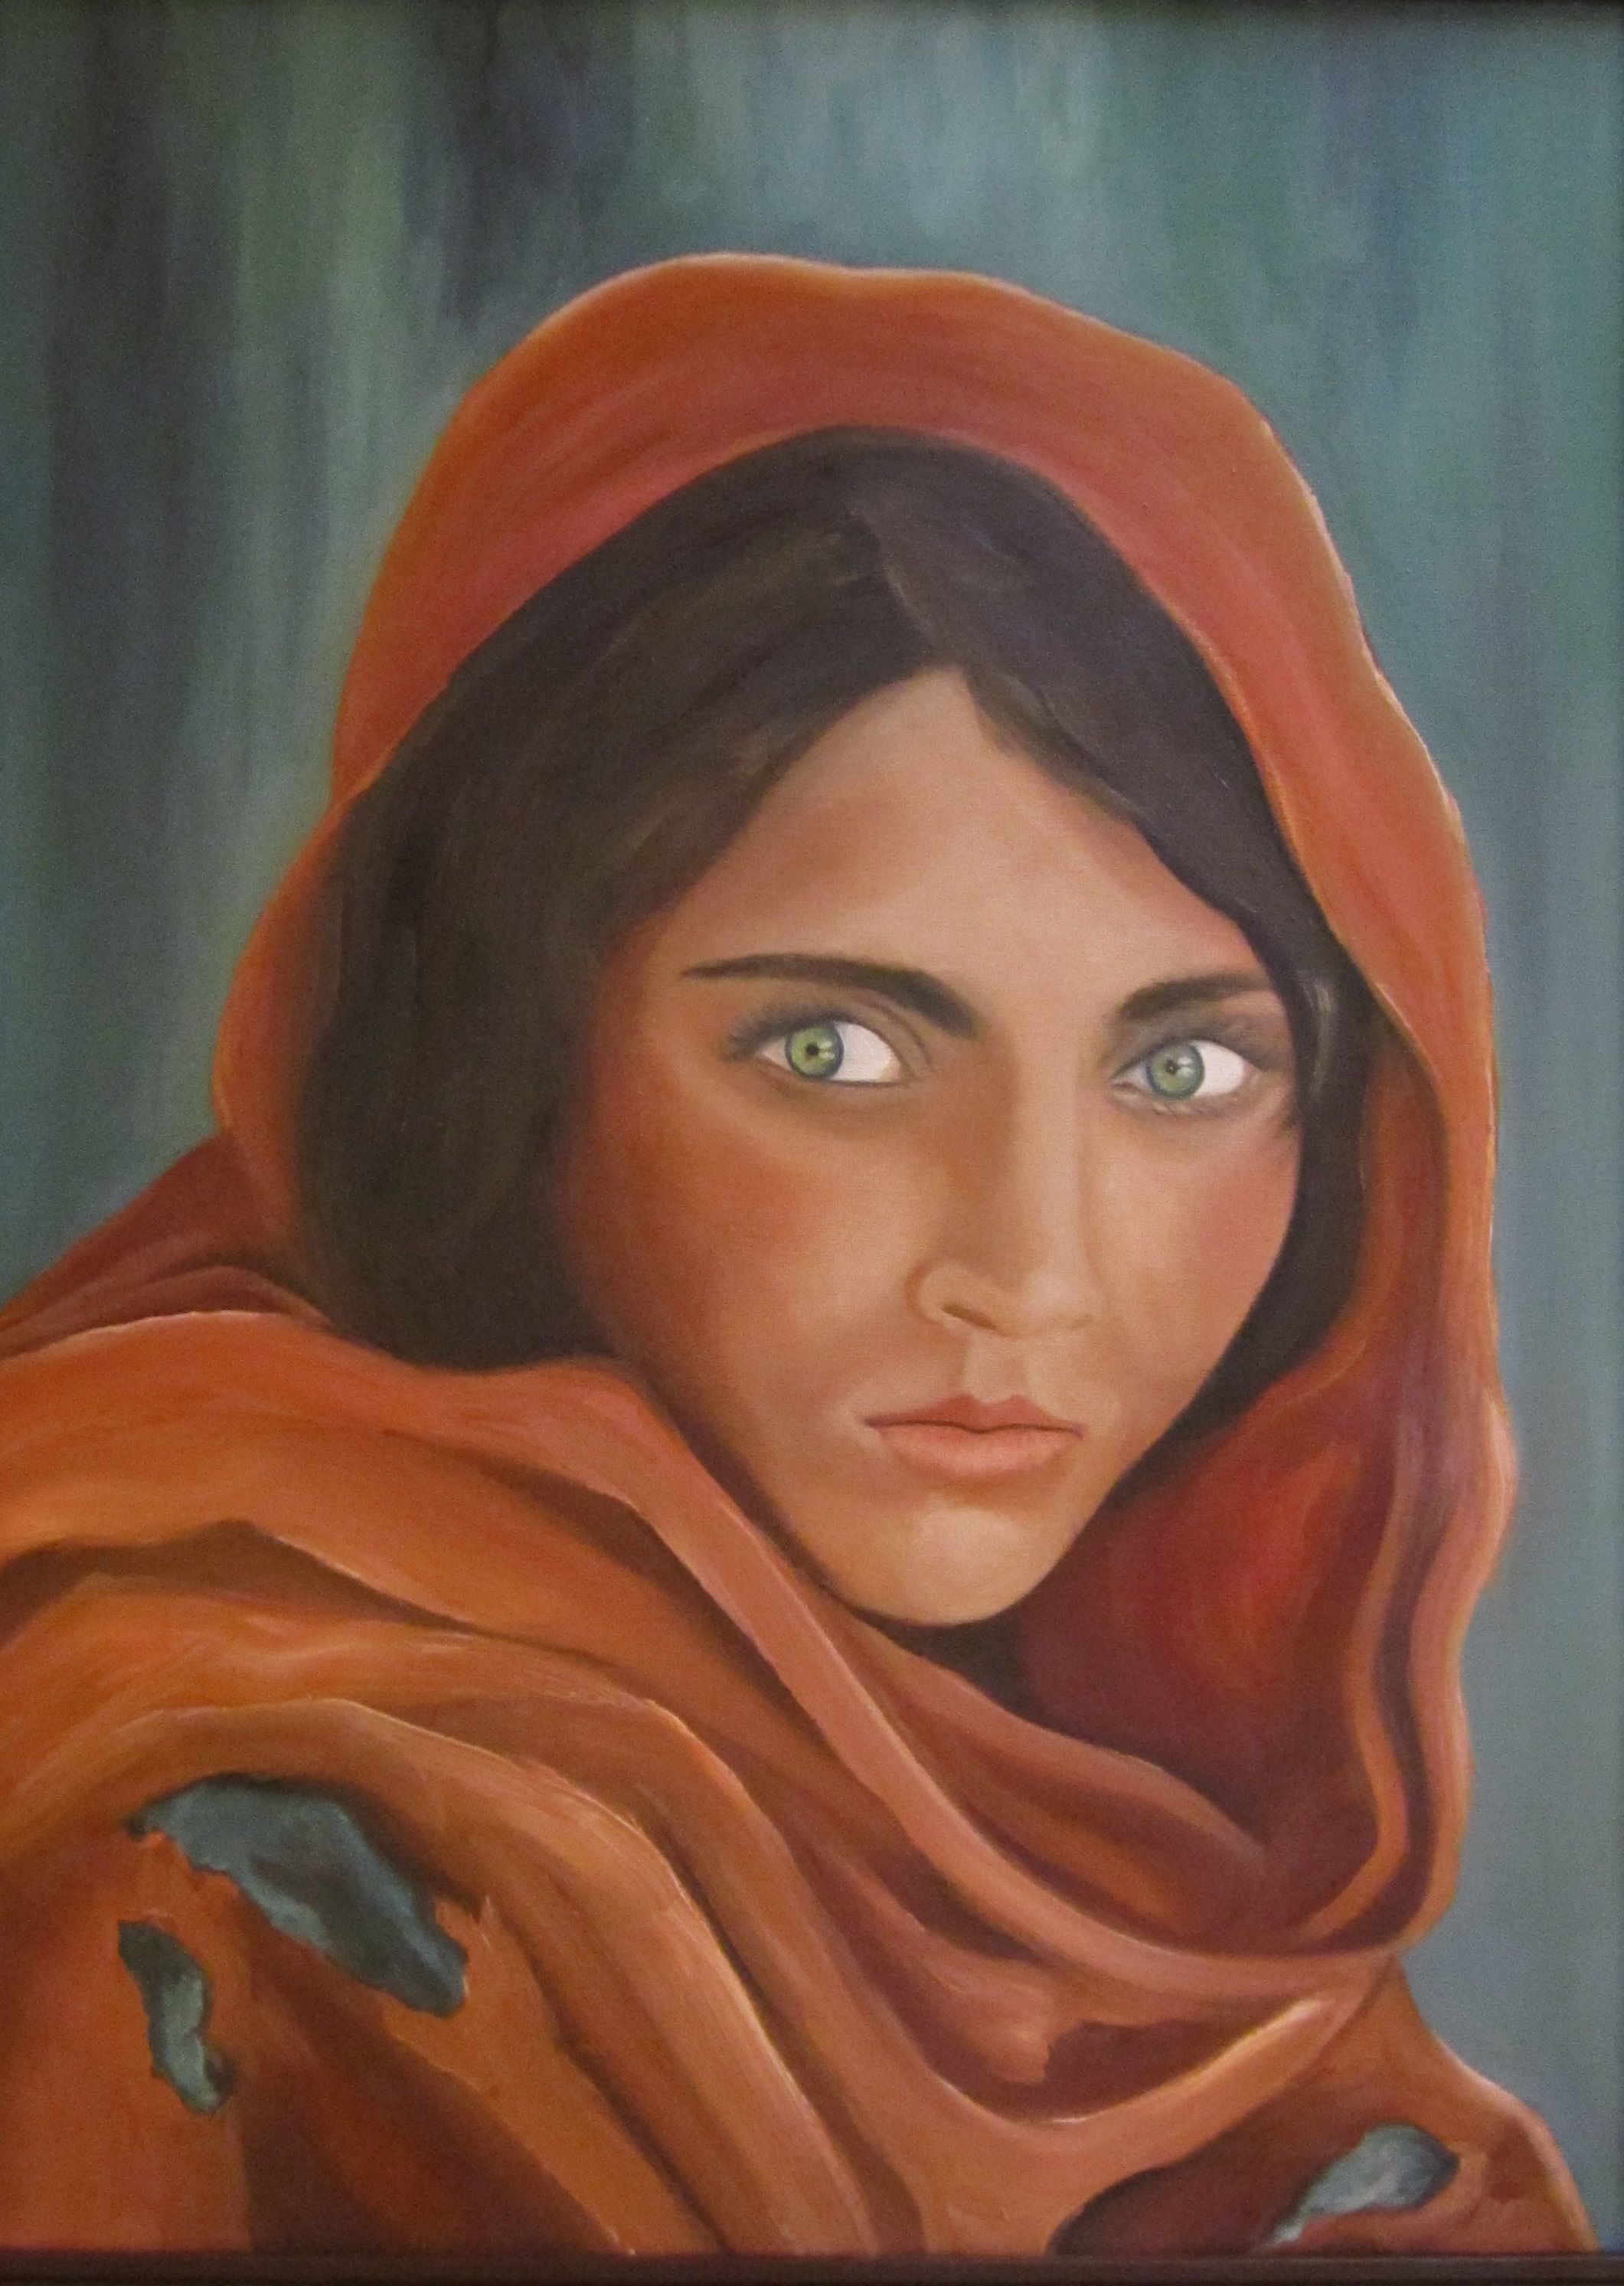 The National Geographic Afghan Girl